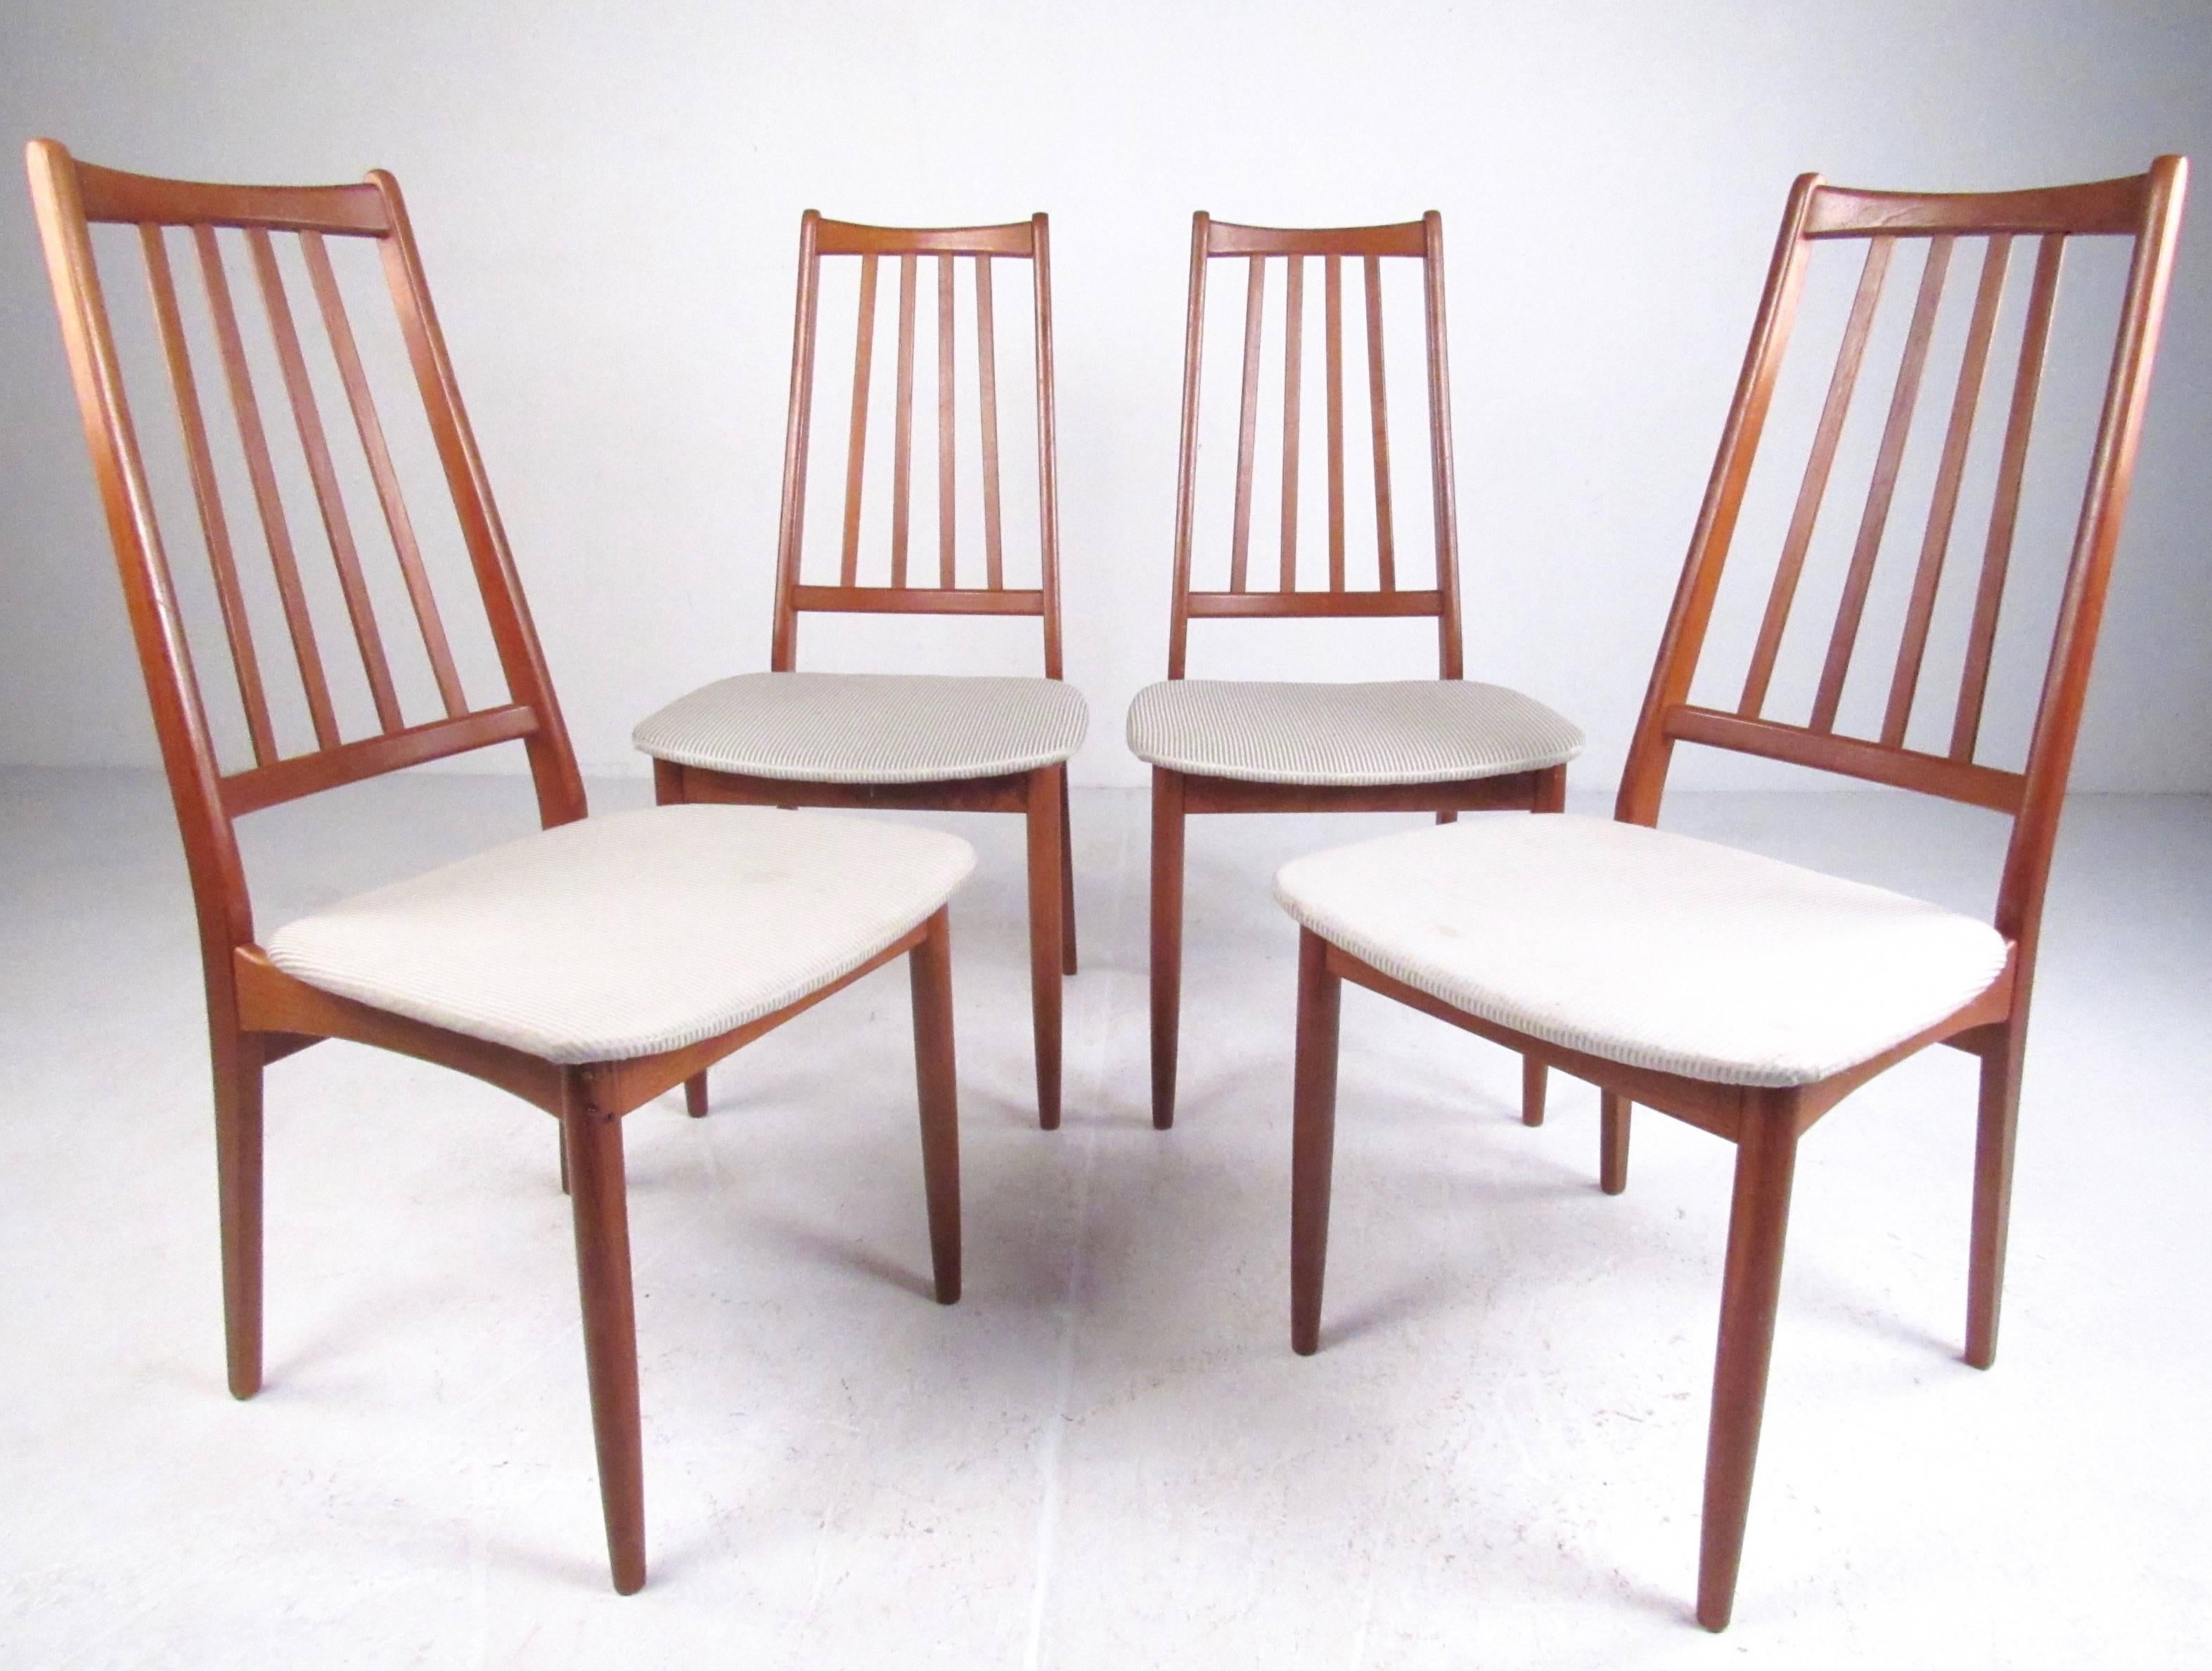 This sleek and slender set of four teak dining chairs feature statuesque high back design with sculpted spokes. Upholstered seats strike a nice contrast with the rich teak finish while tapered legs round out the Mid-Century Modern style of this